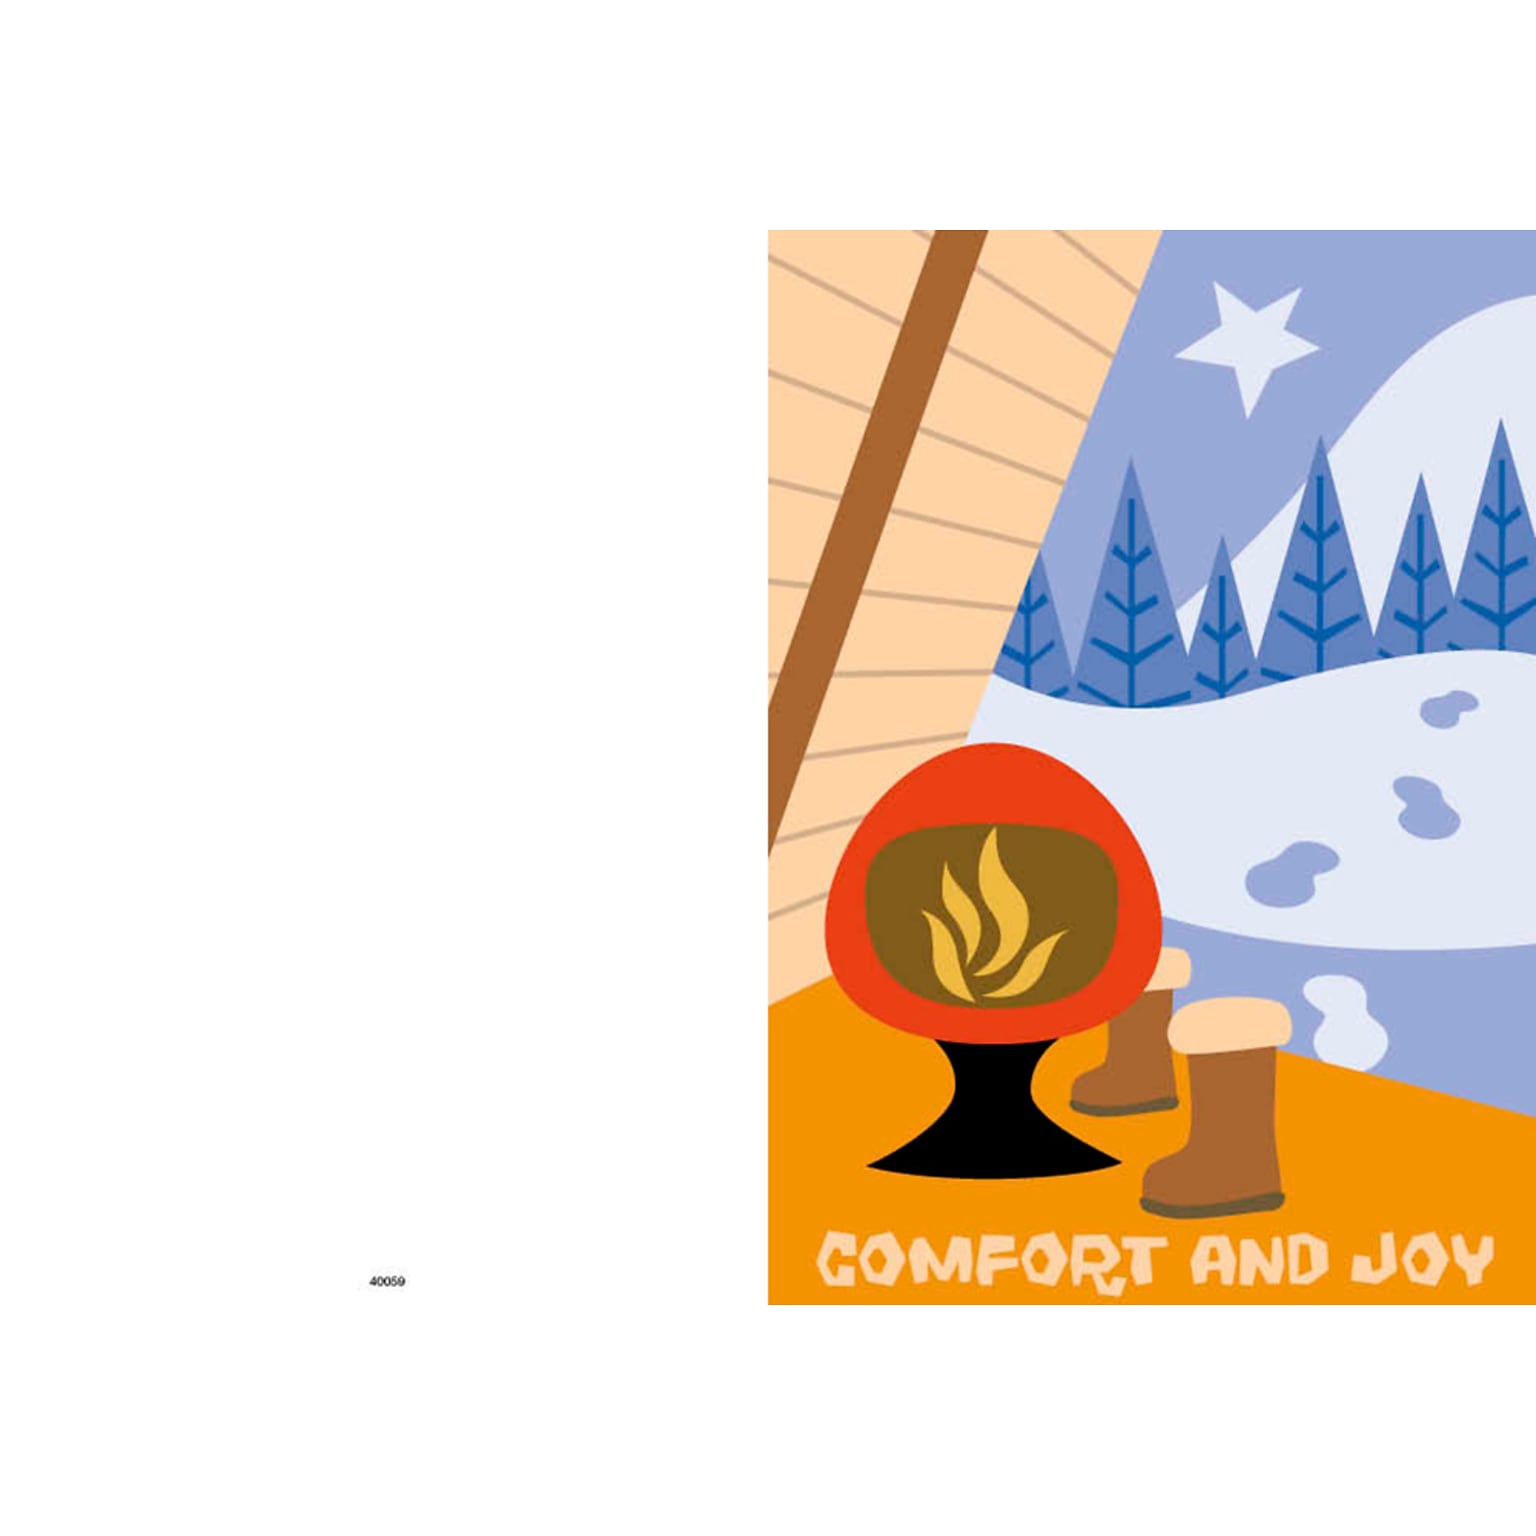 Comfort and joy - campfire - boots - 7 x 10 scored for folding to 7 x 5, 25 cards w/A7 envelopes per set